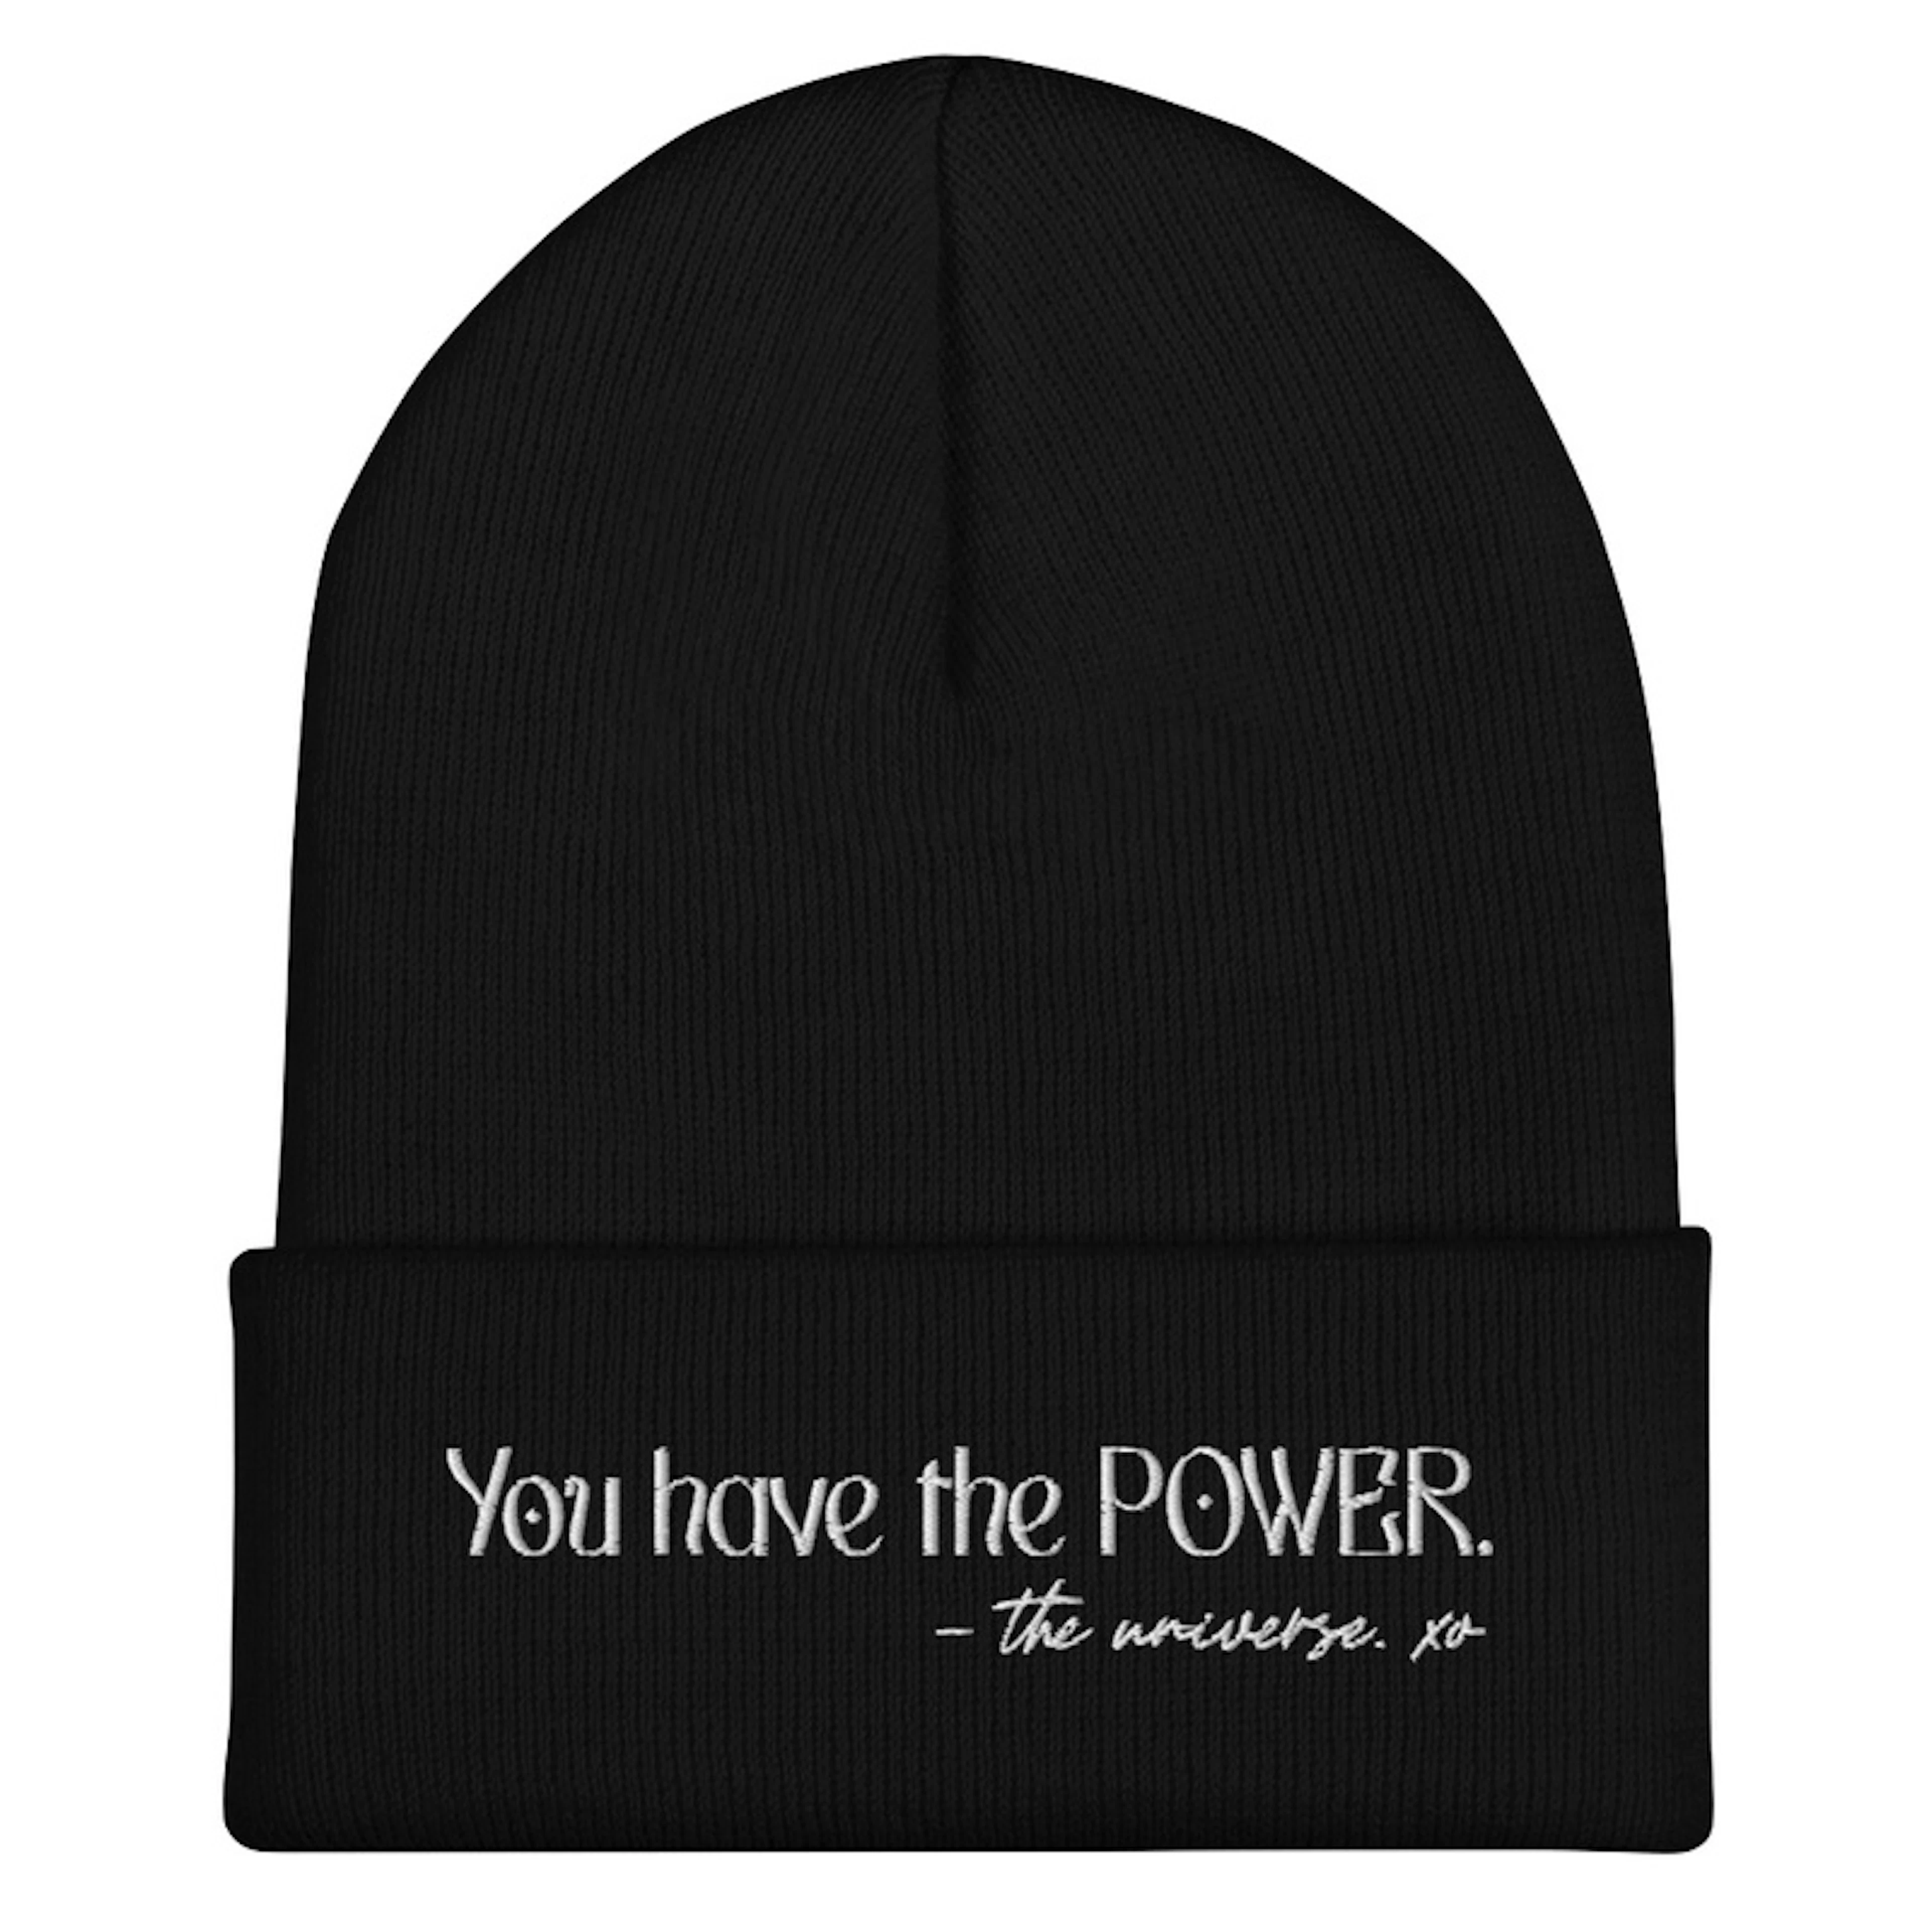 "You have the POWER." Beanie